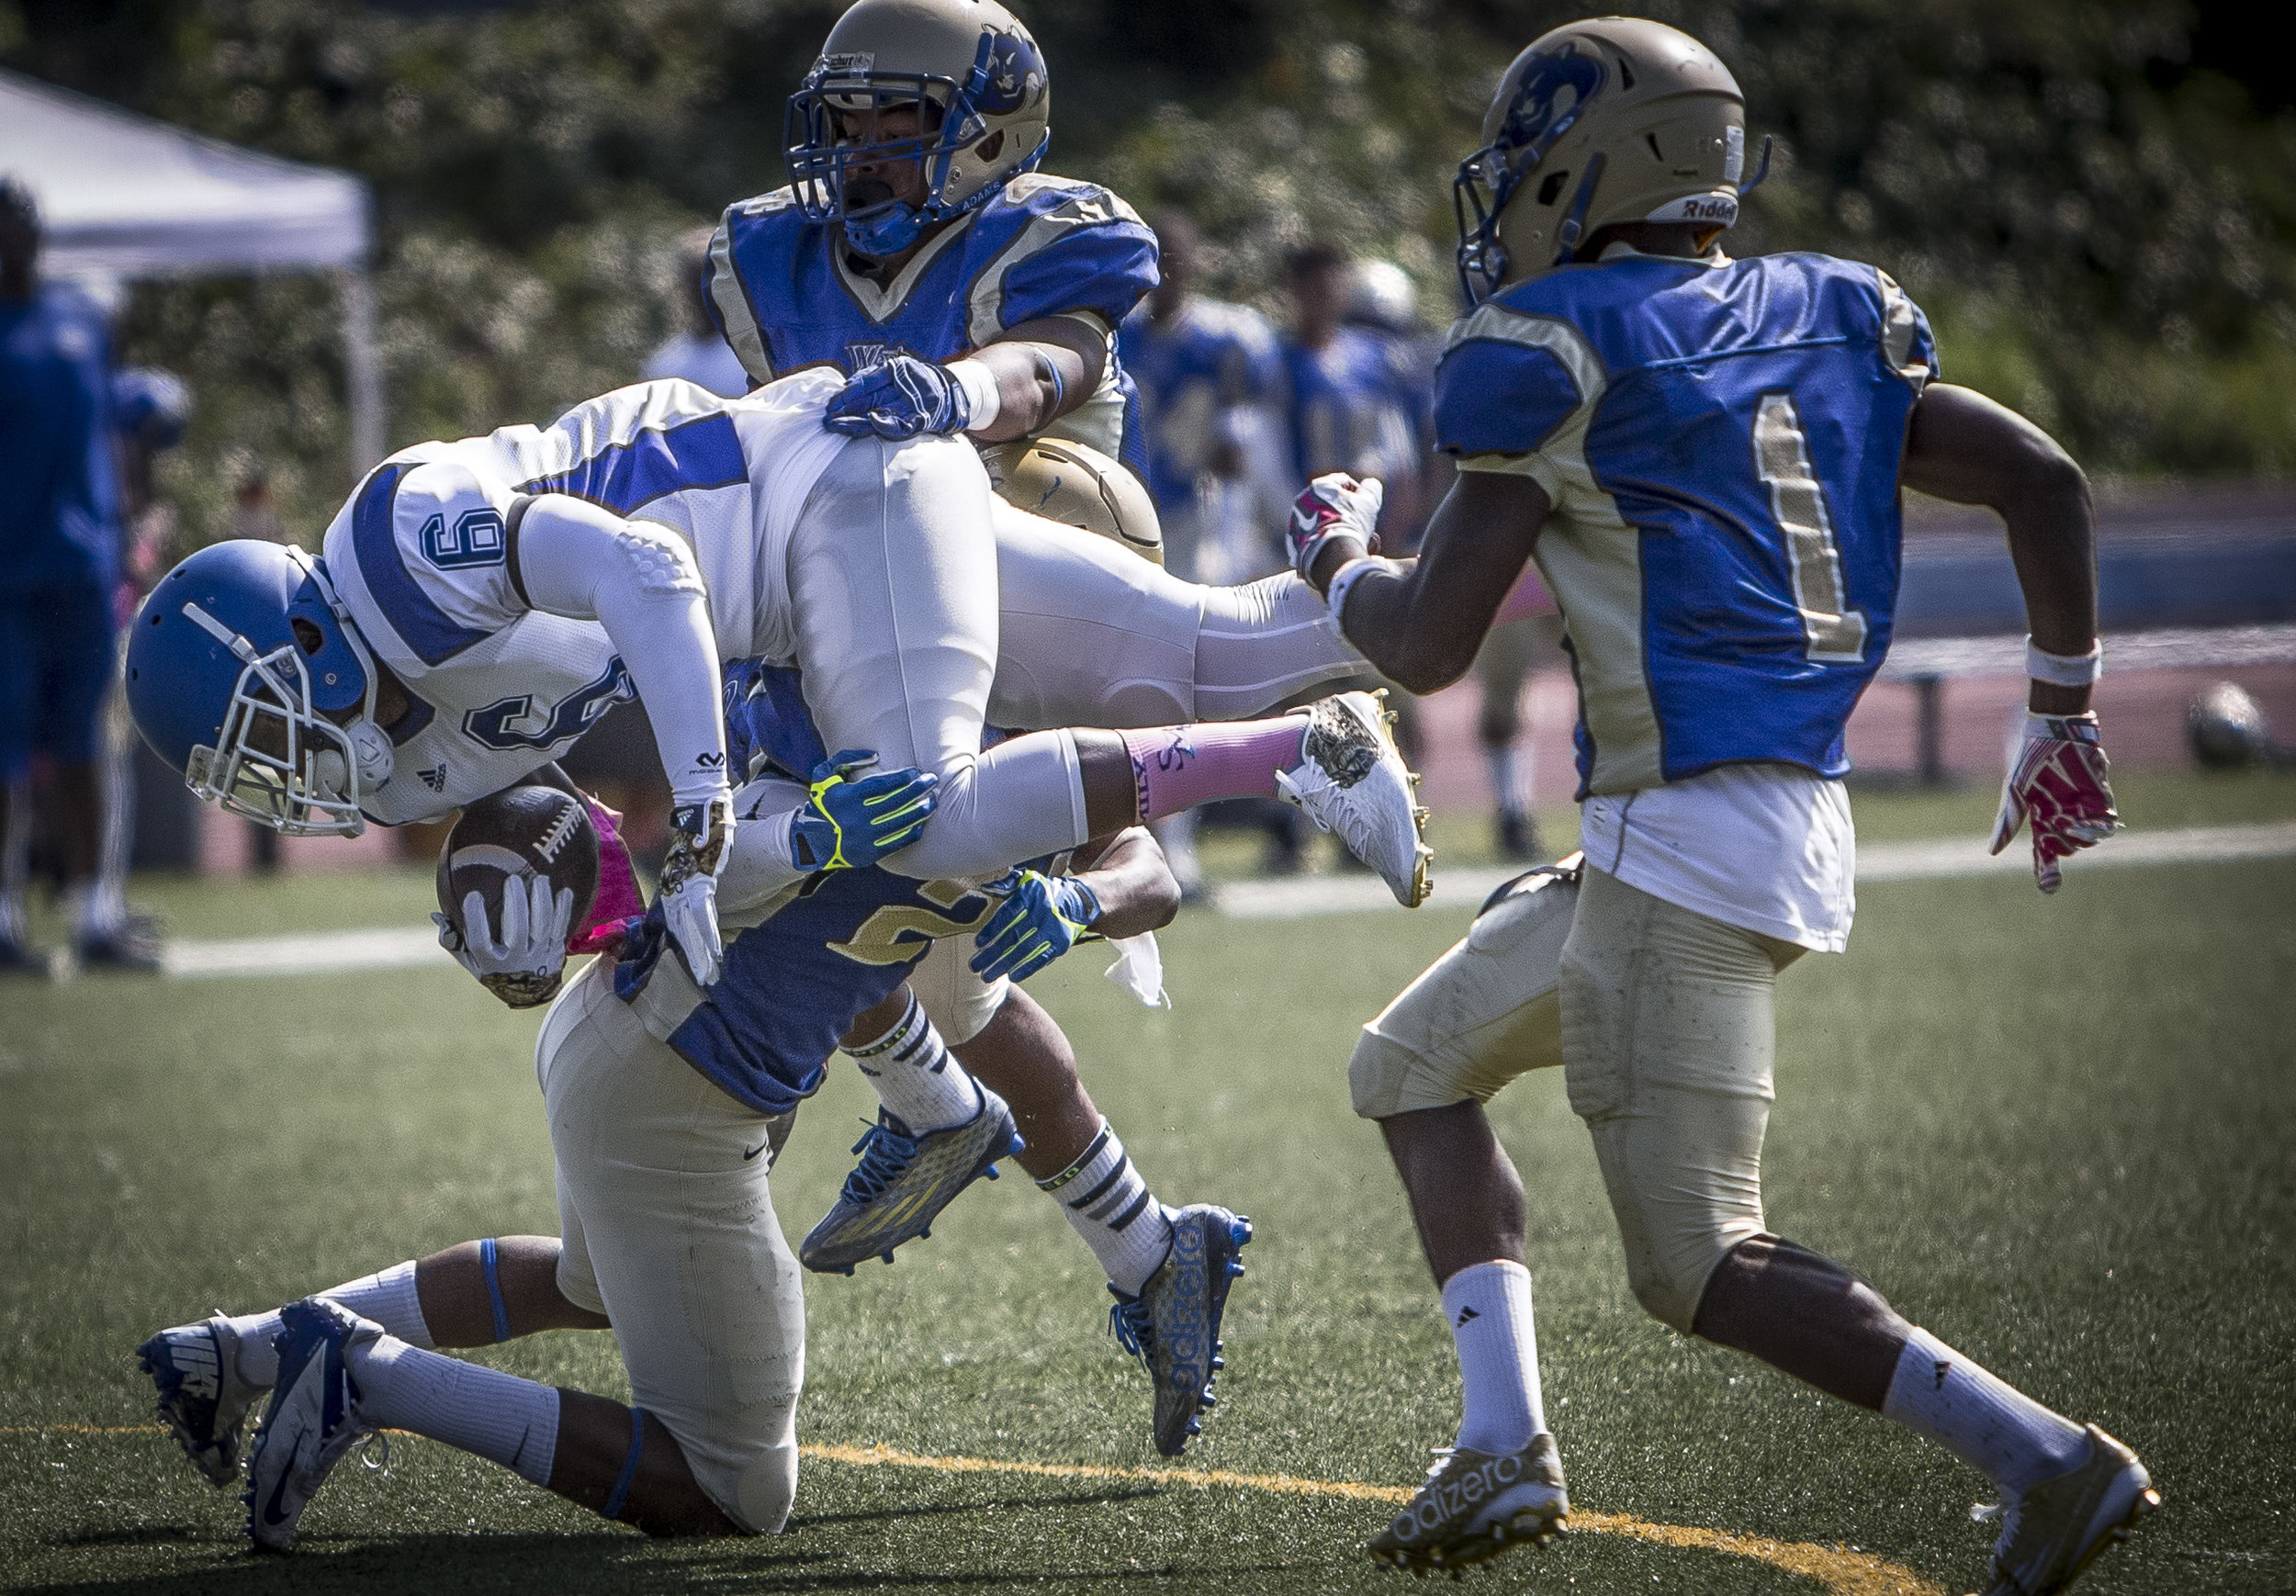  The Santa Monica College Corsairs men's football team sophmore runningback #6 Martaveous Holiday (white,middle) gets tackled after making a rush for a long gain aganst The West La College Wildcats sophmore defensive back #2 Grant Cohen (blue,bottom)